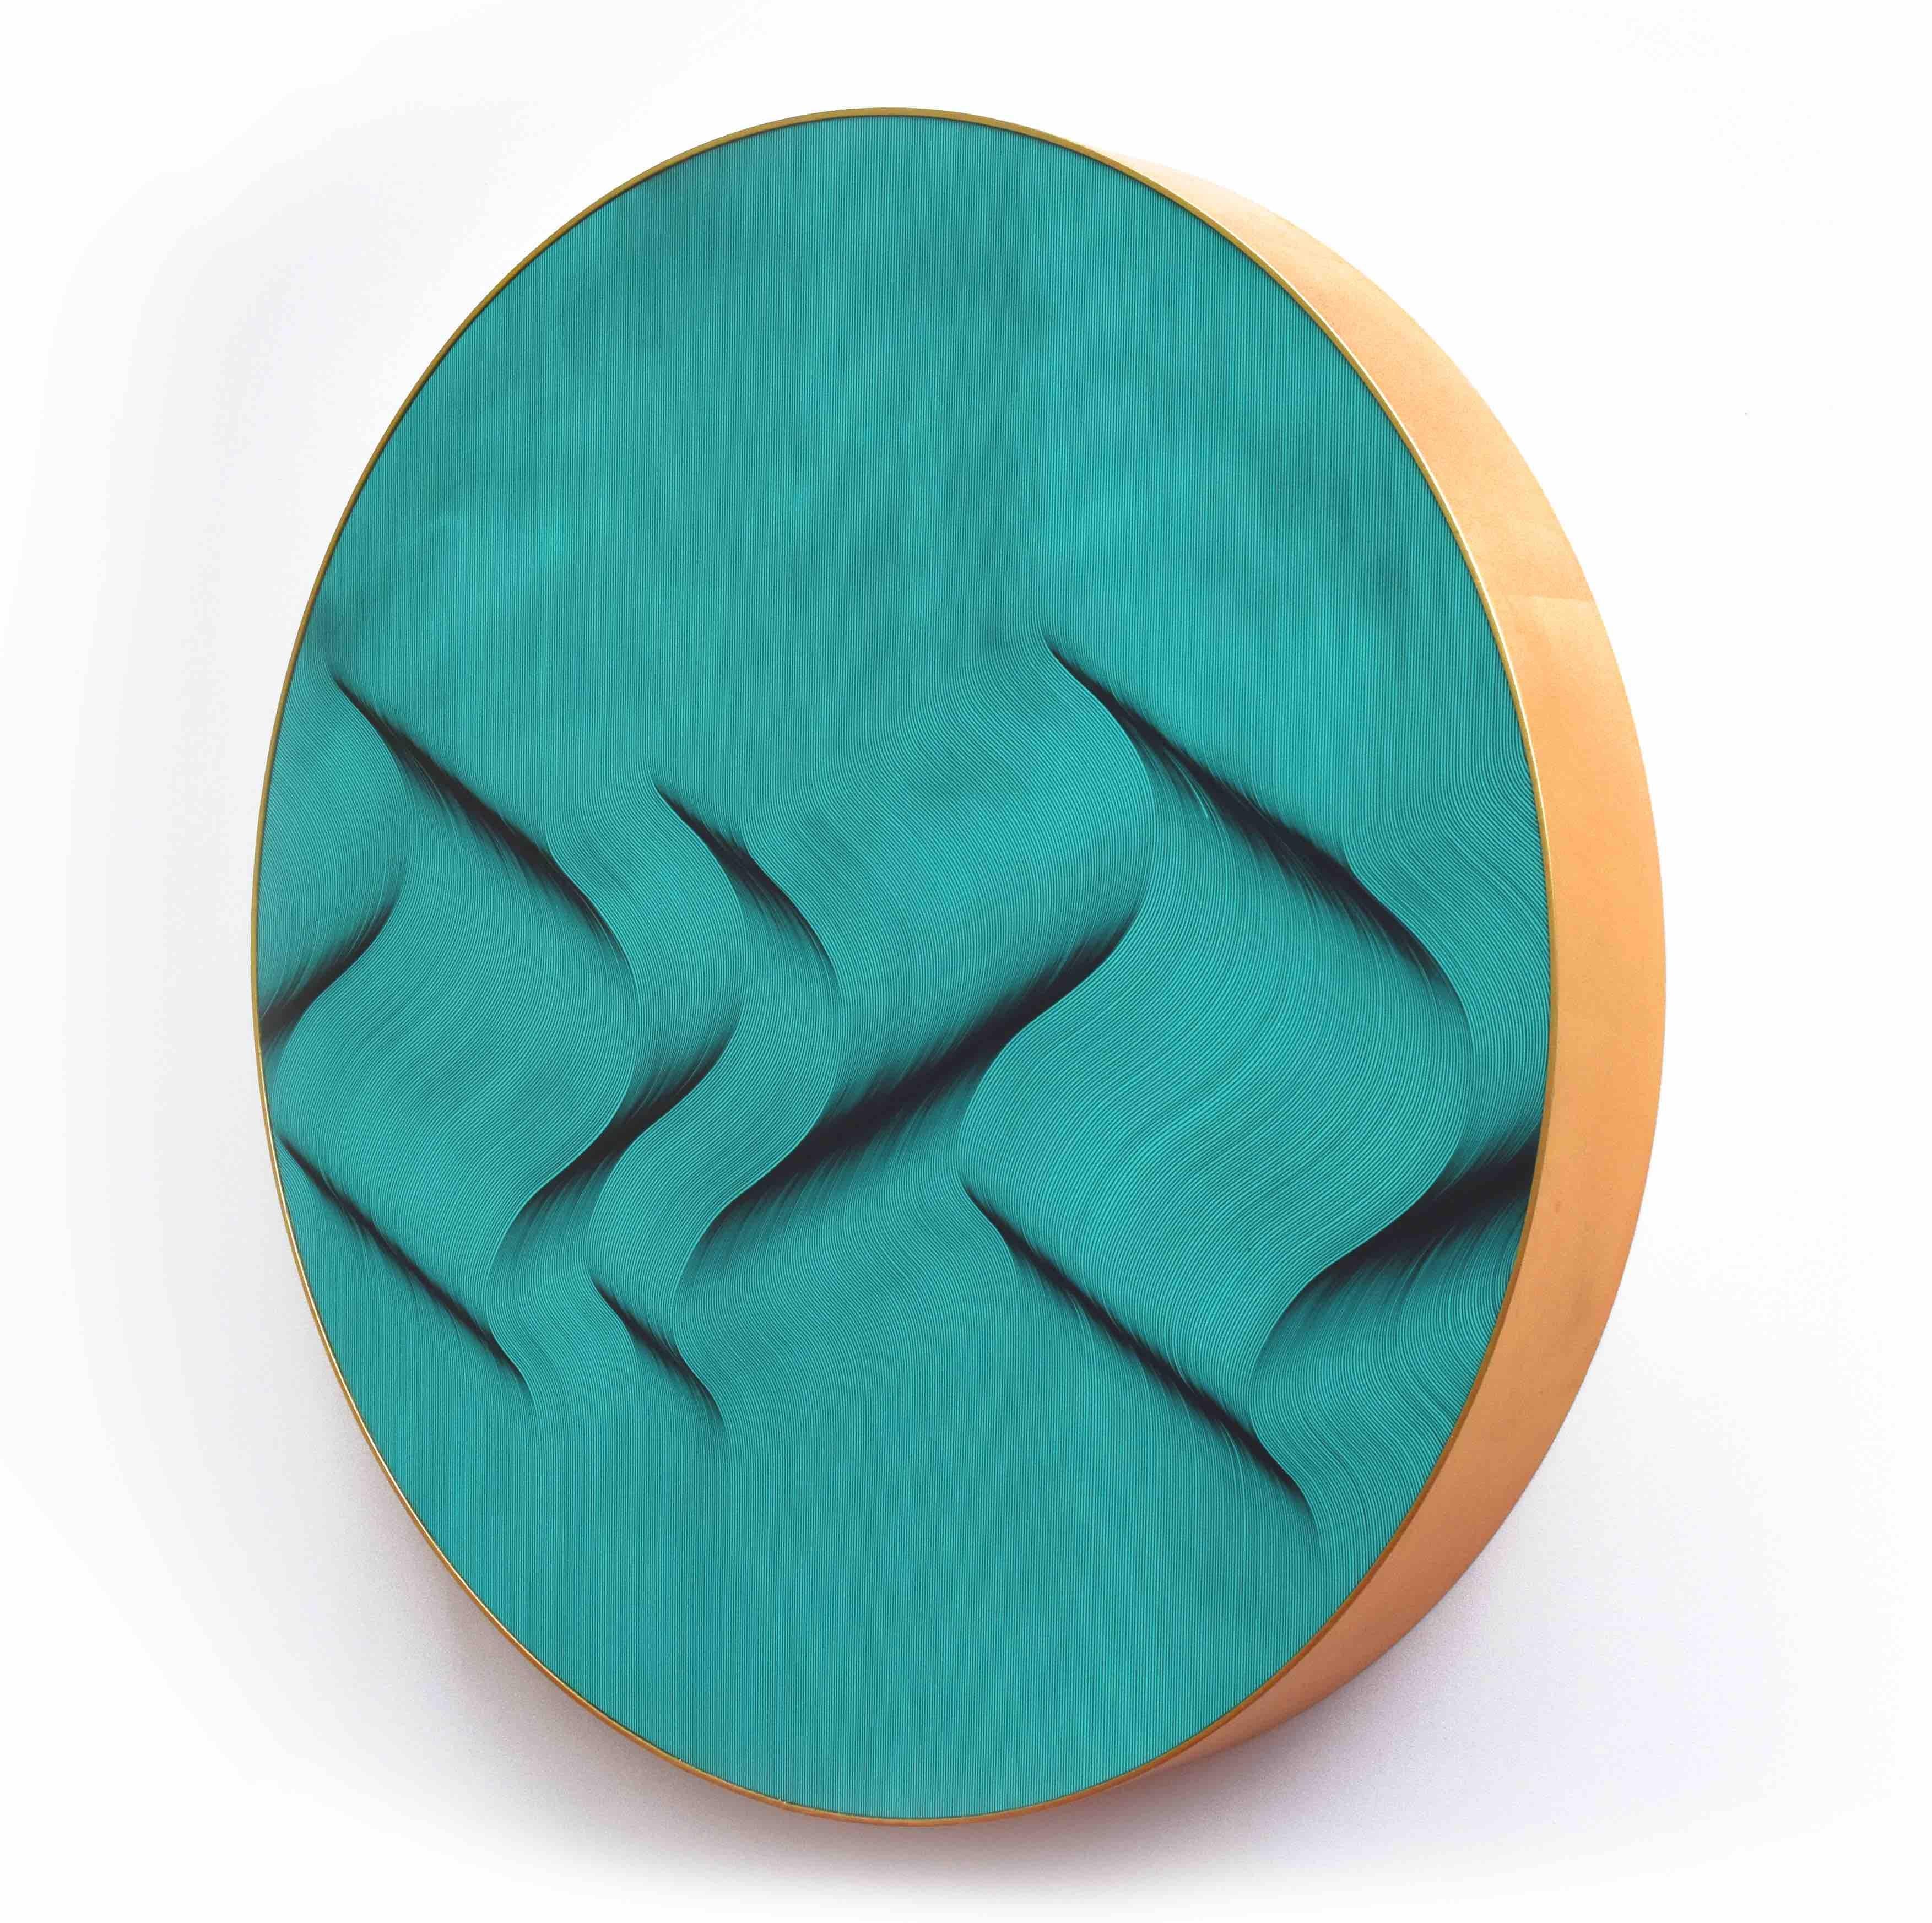 Turquoise wave 2021 - geometric abstract painting - Painting by Roberto Lucchetta